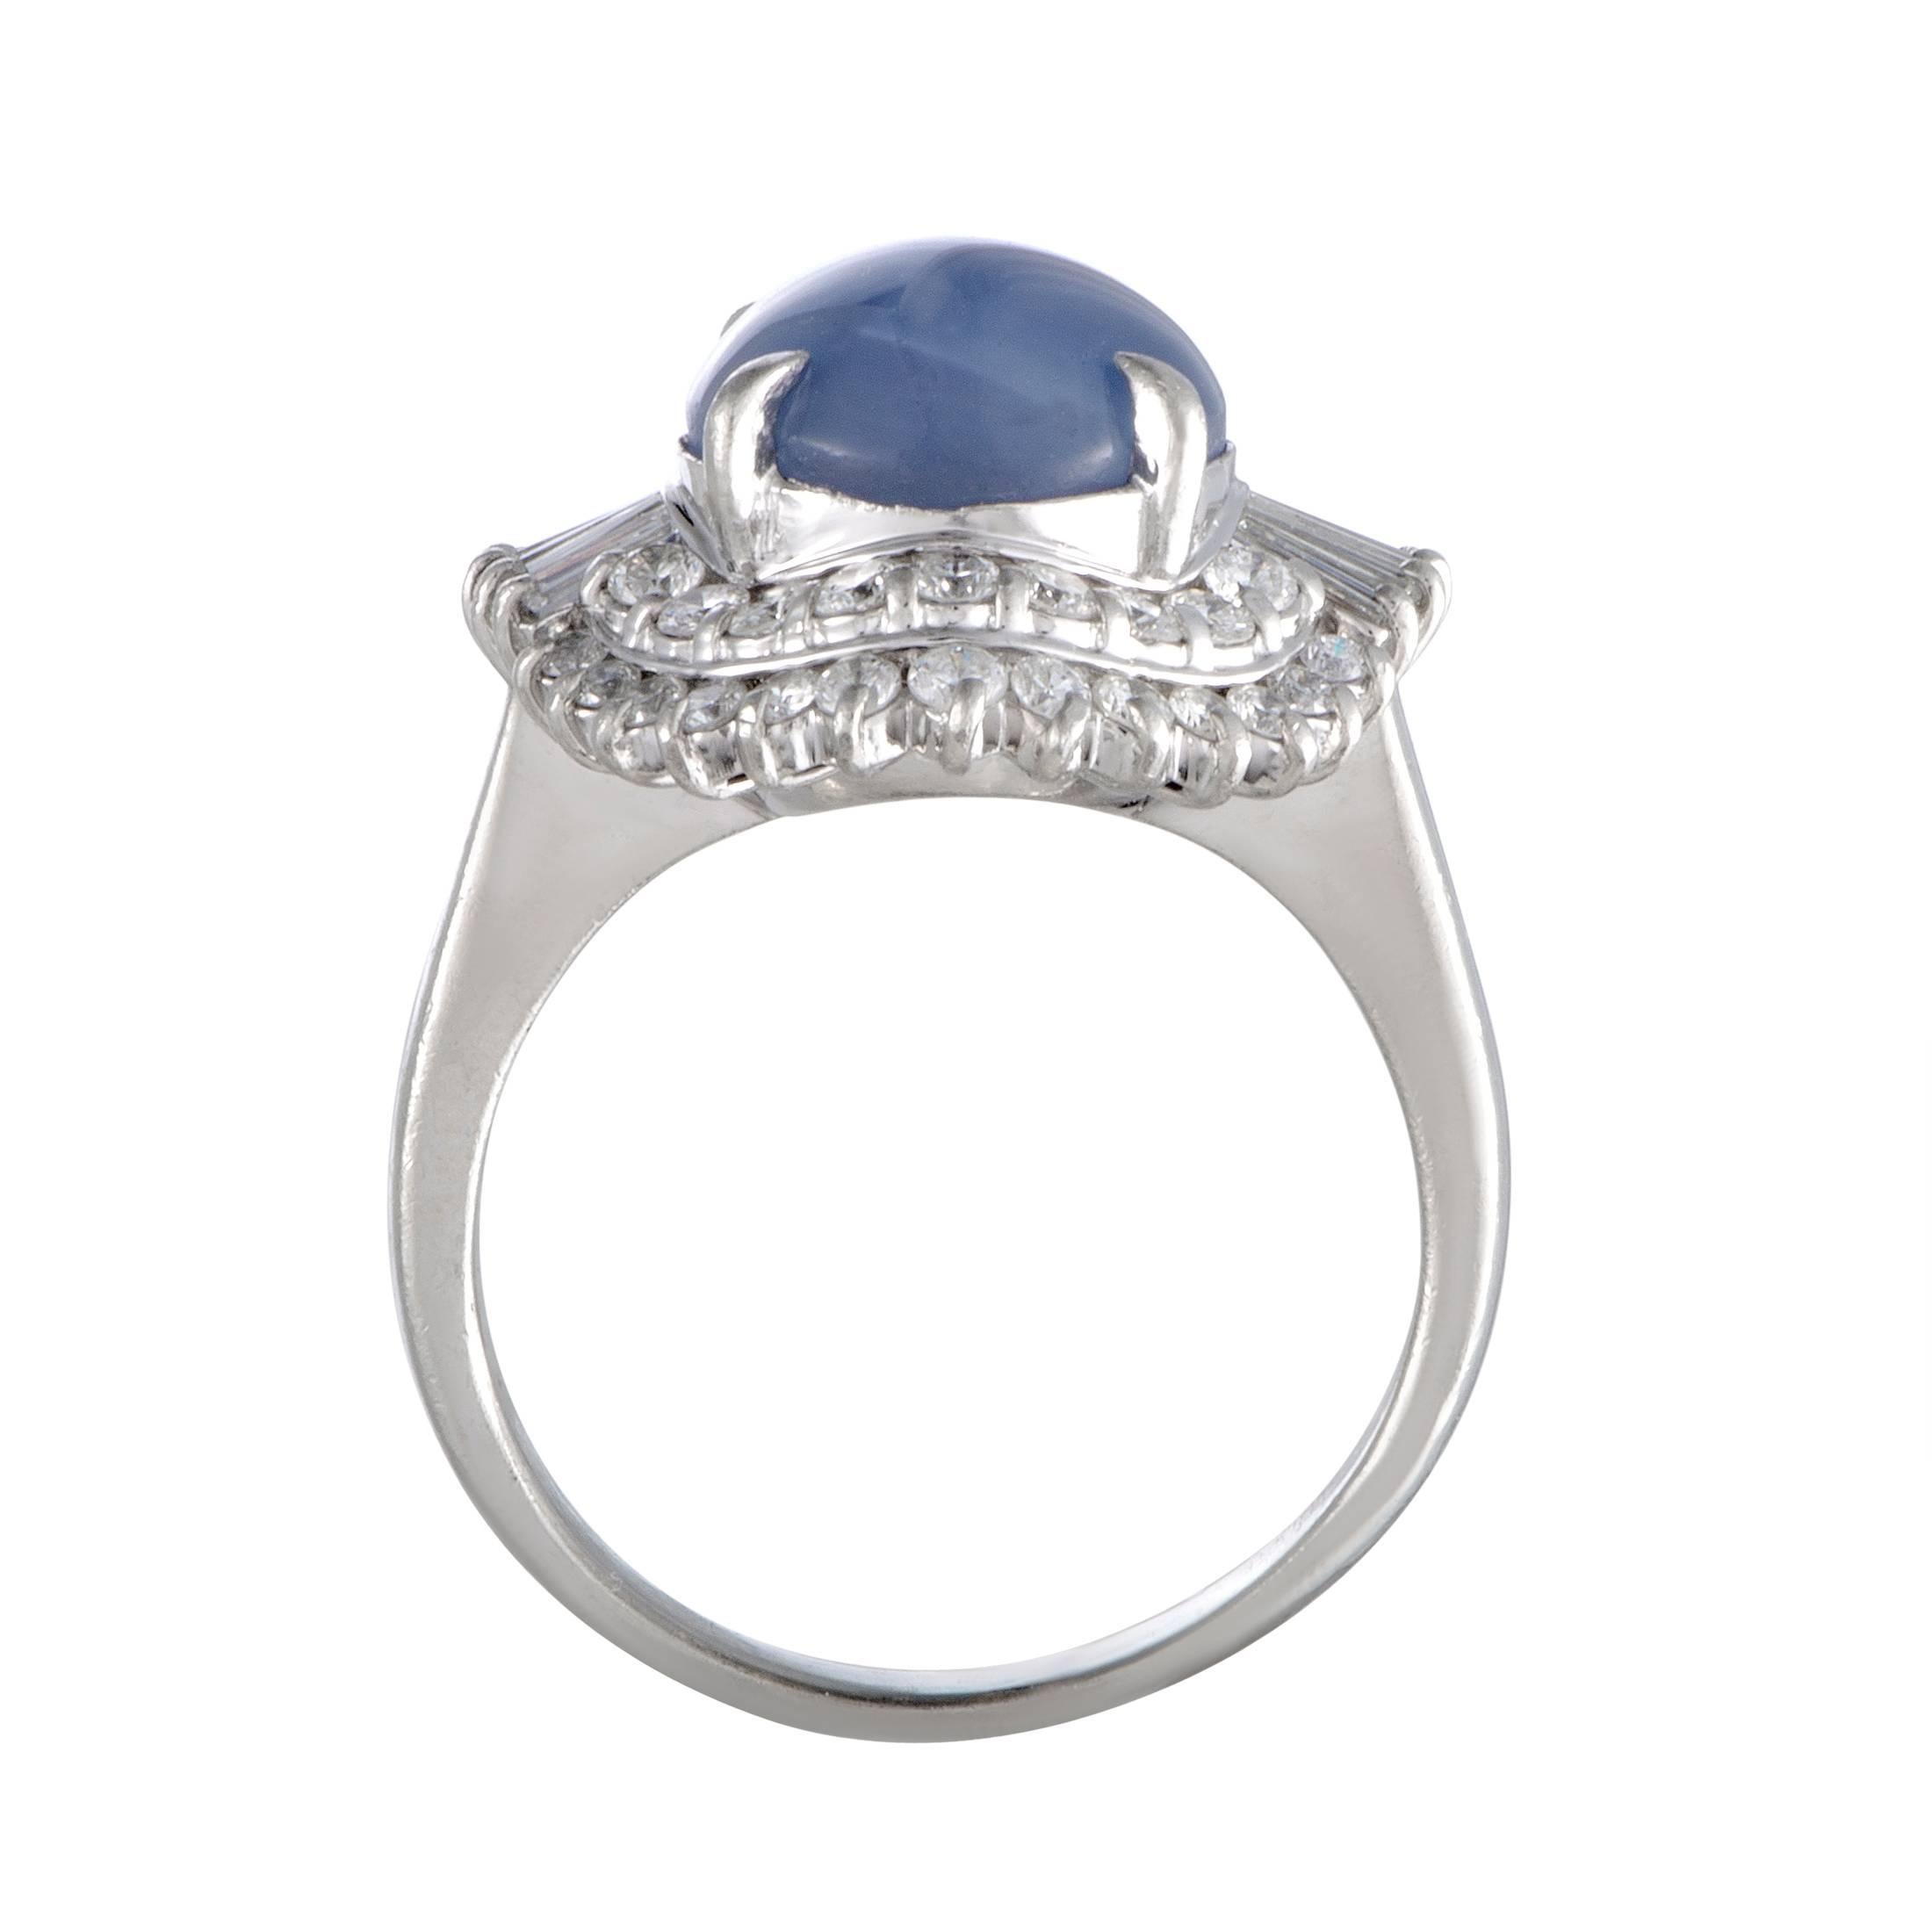 The harmonious blend of scintillating diamonds and sublime star sapphire decorates this ring in the most splendid manner, giving it a stunningly sophisticated appeal. The ring is made of platinum and boasts a total of 1.41 carats of diamonds, while